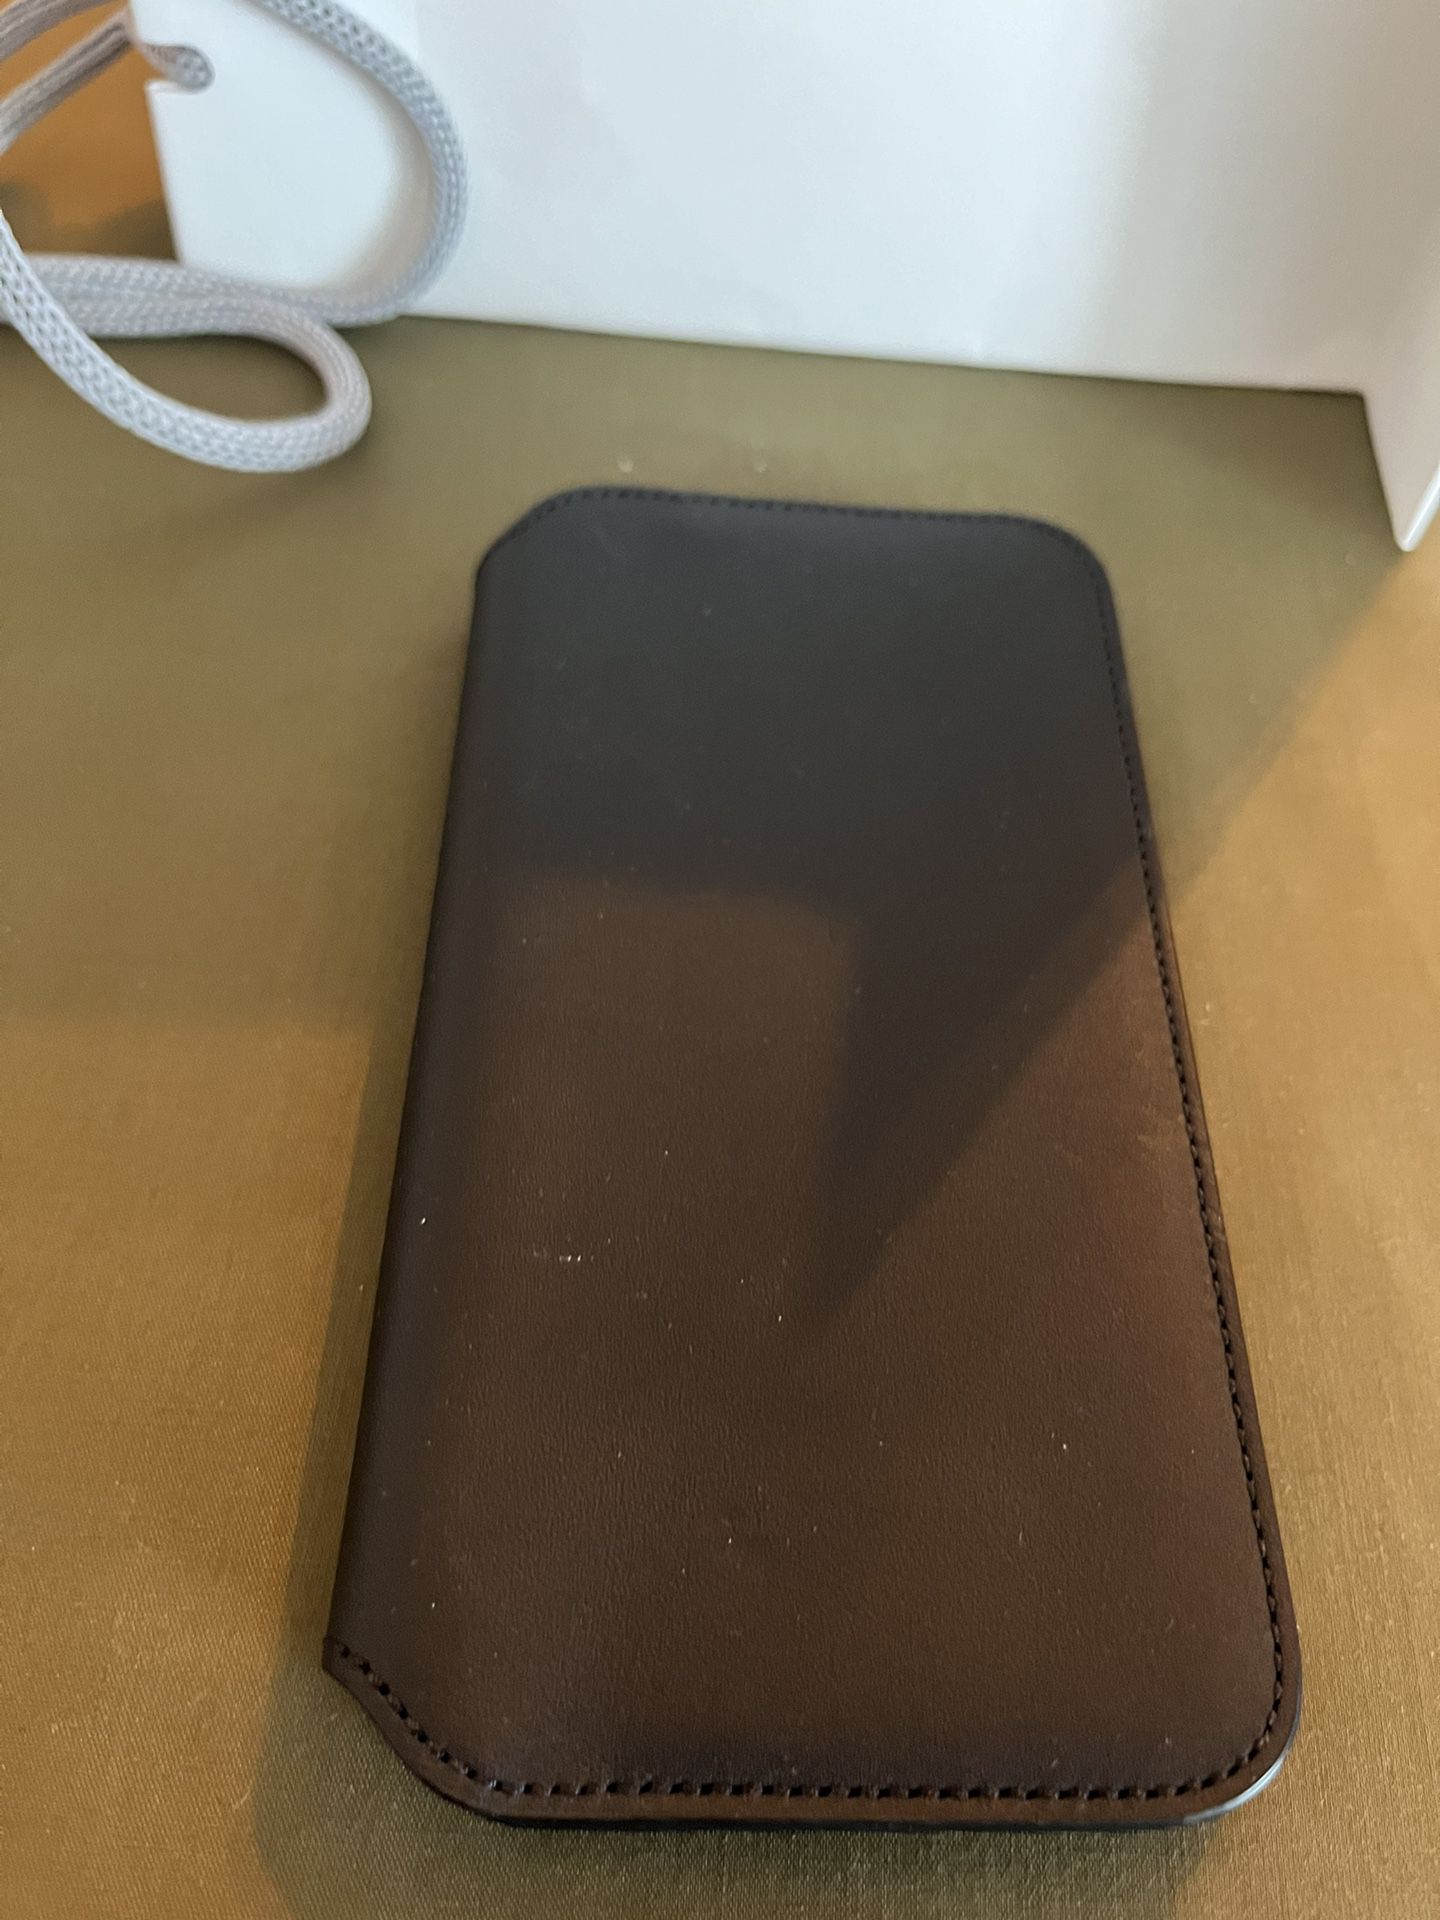 Iphone x/xs leather case, new no box $10